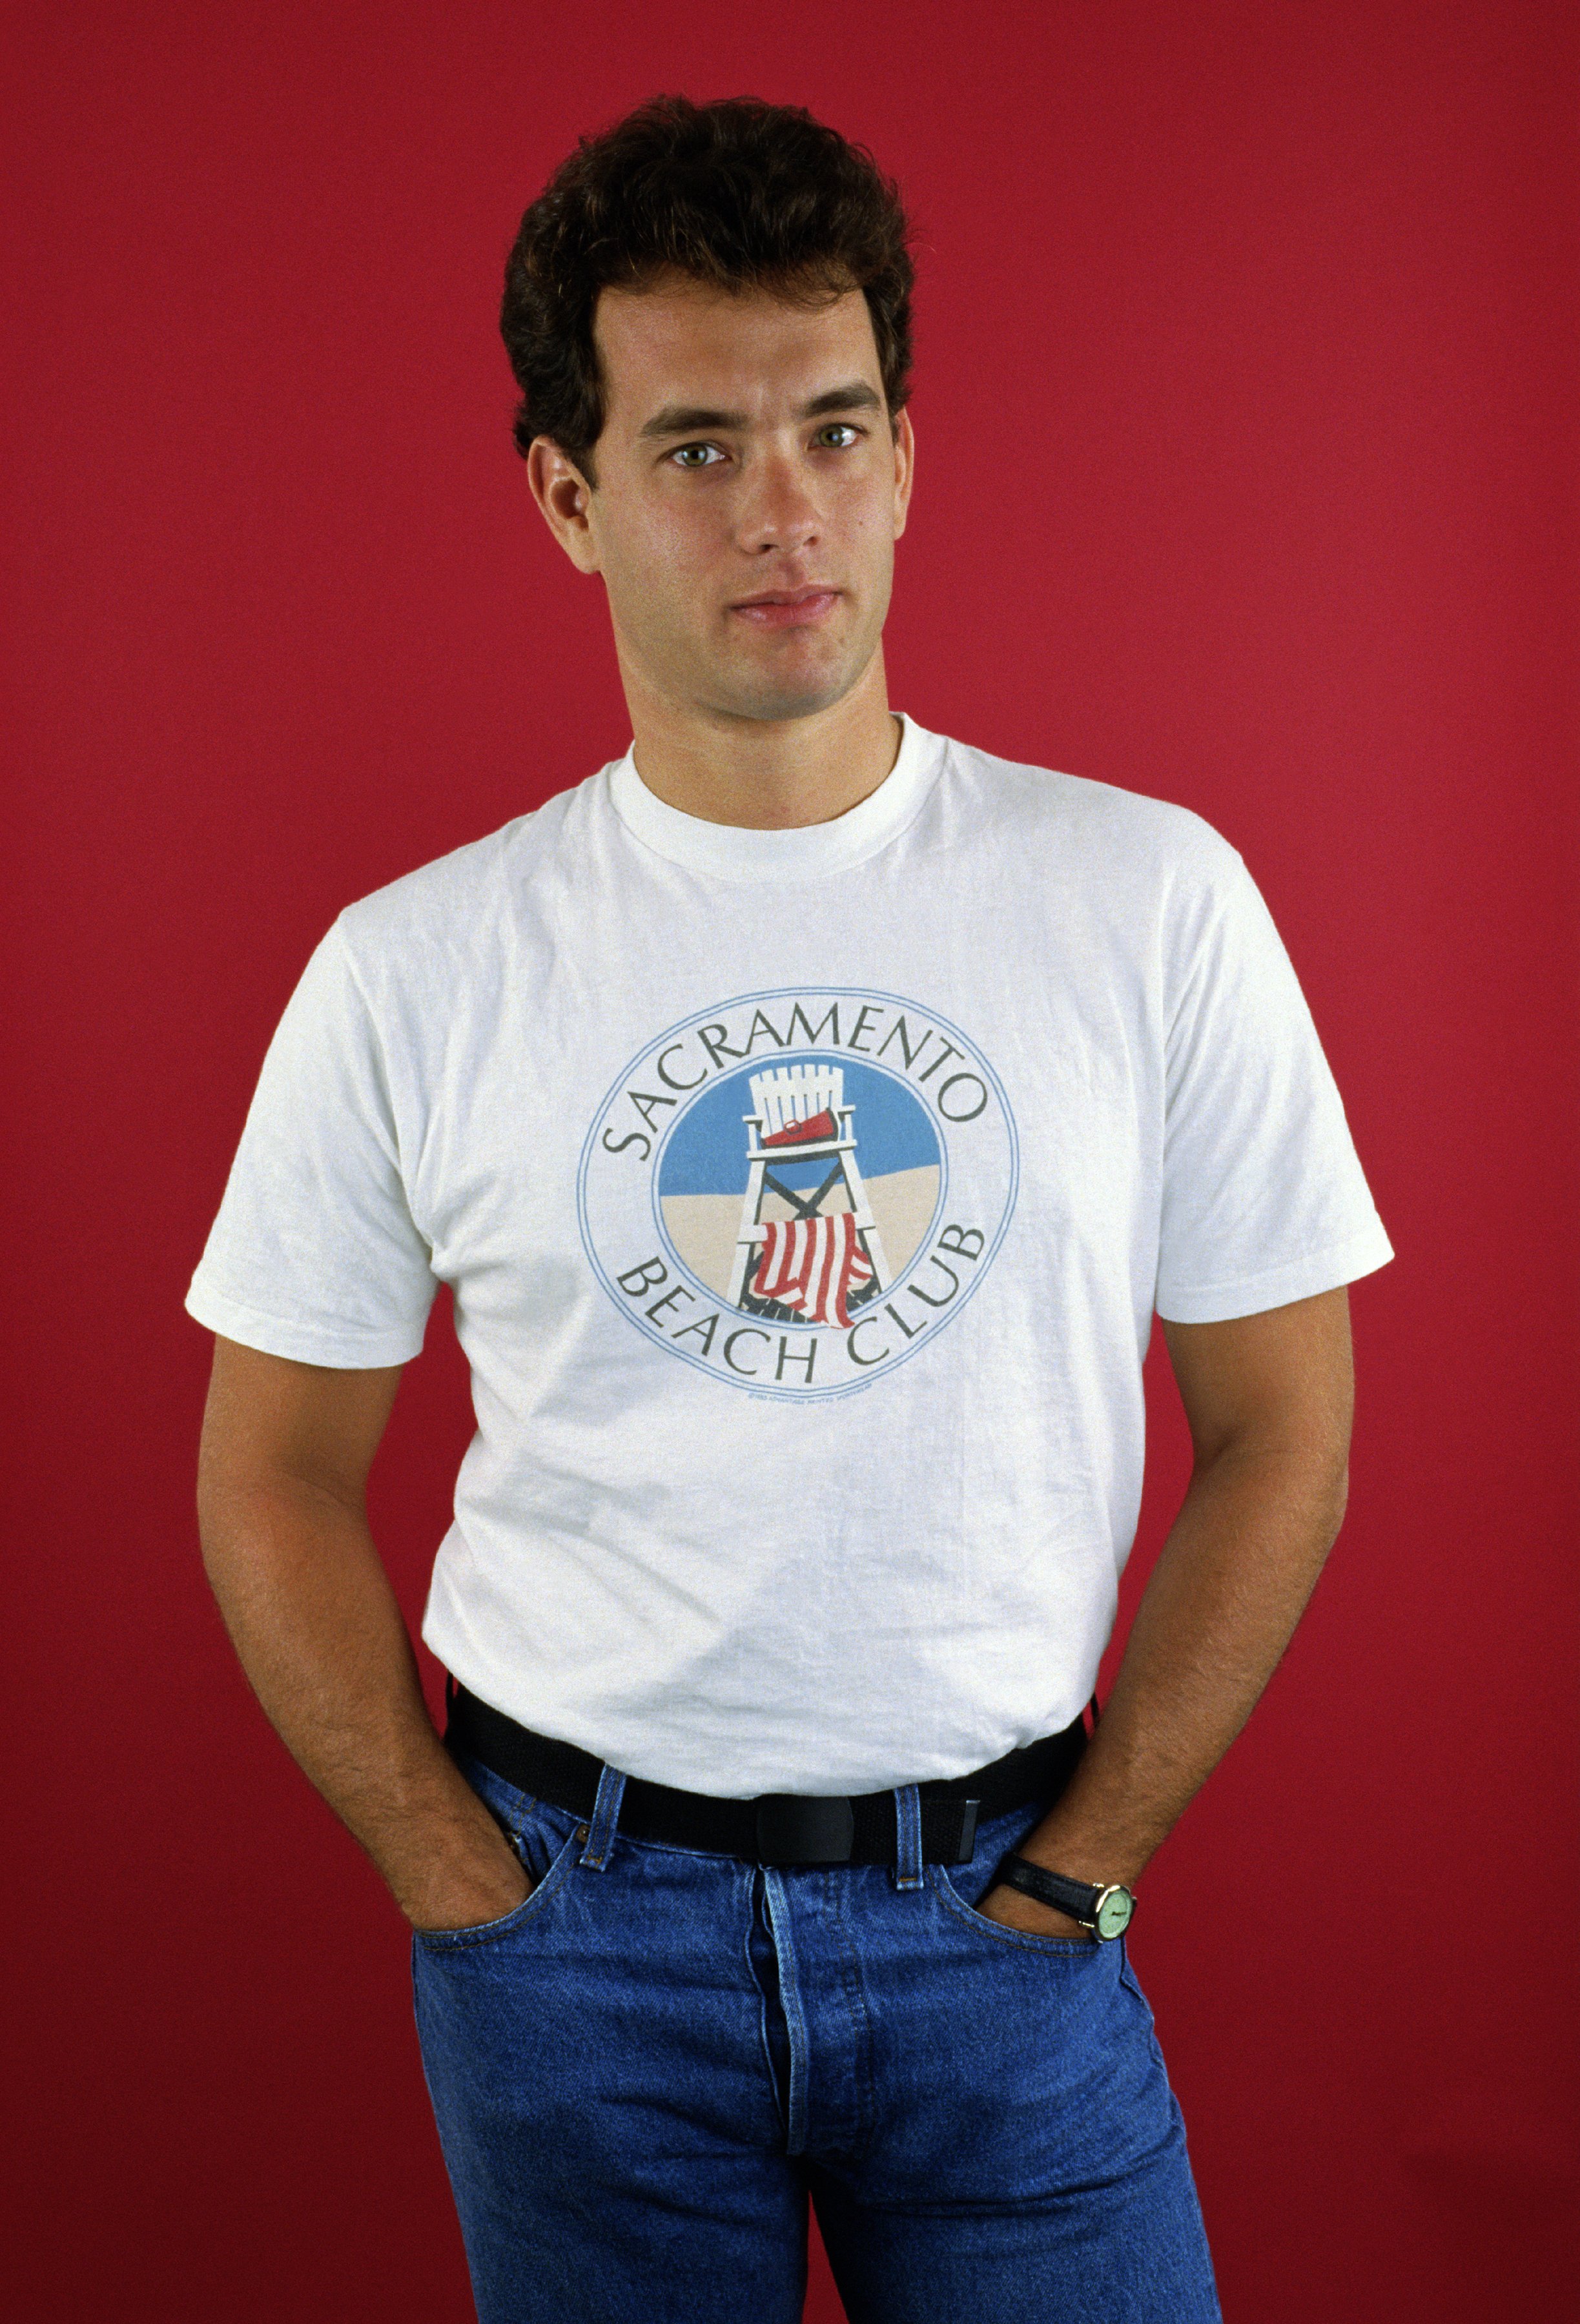 Tom Hanks poses in a studio in West Hollywood, California on 1986. | Source: Getty Images